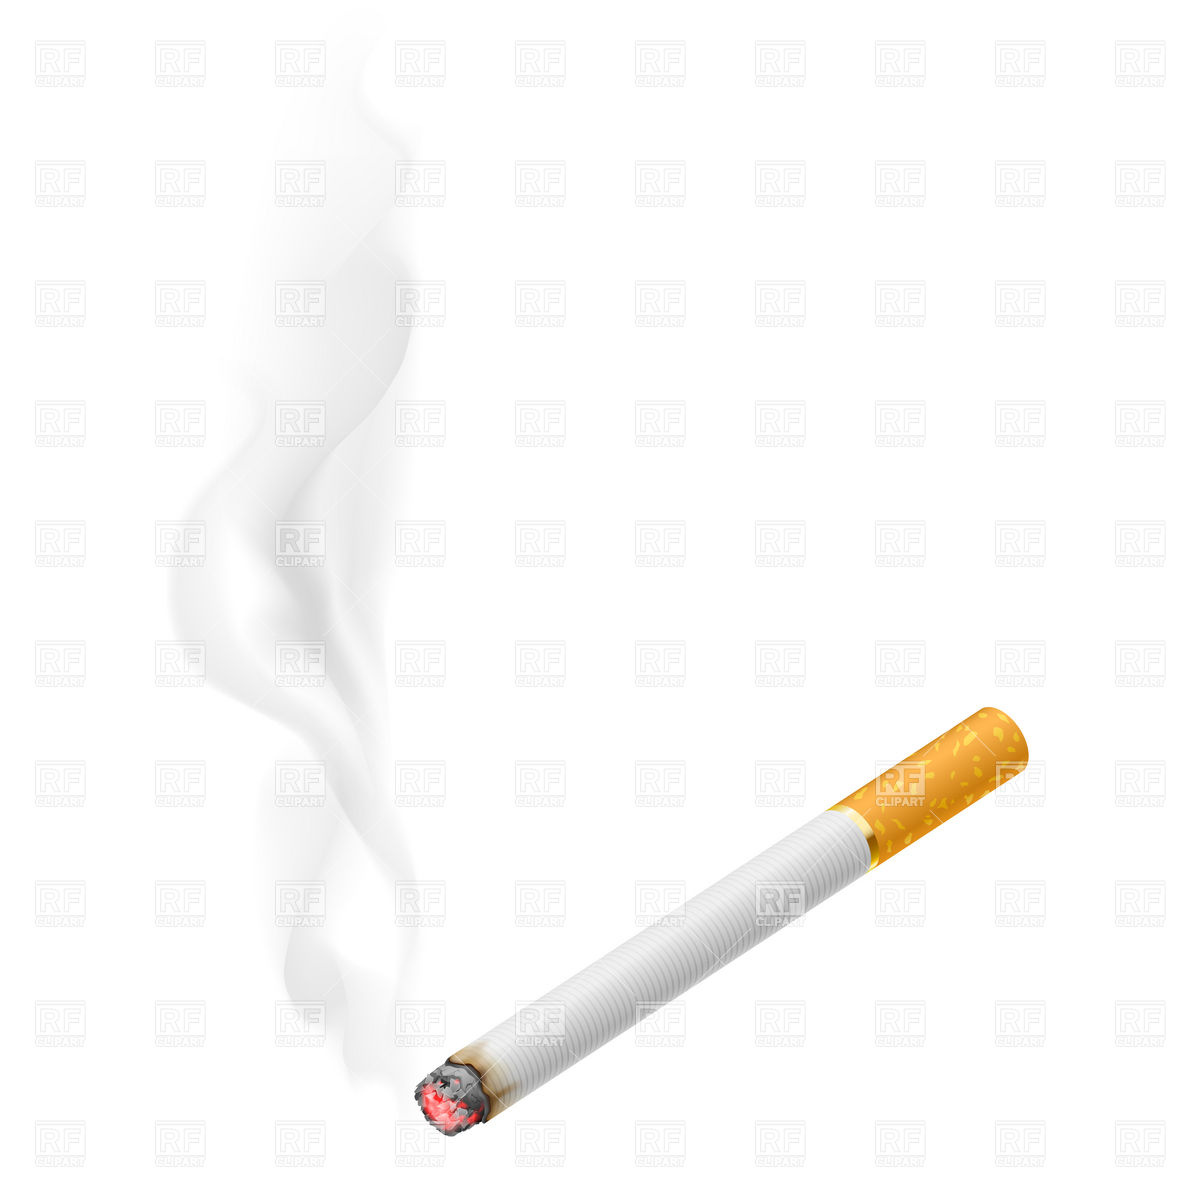 Smoke 7402 Healthcare Medical Download Royalty Free Vector Clipart